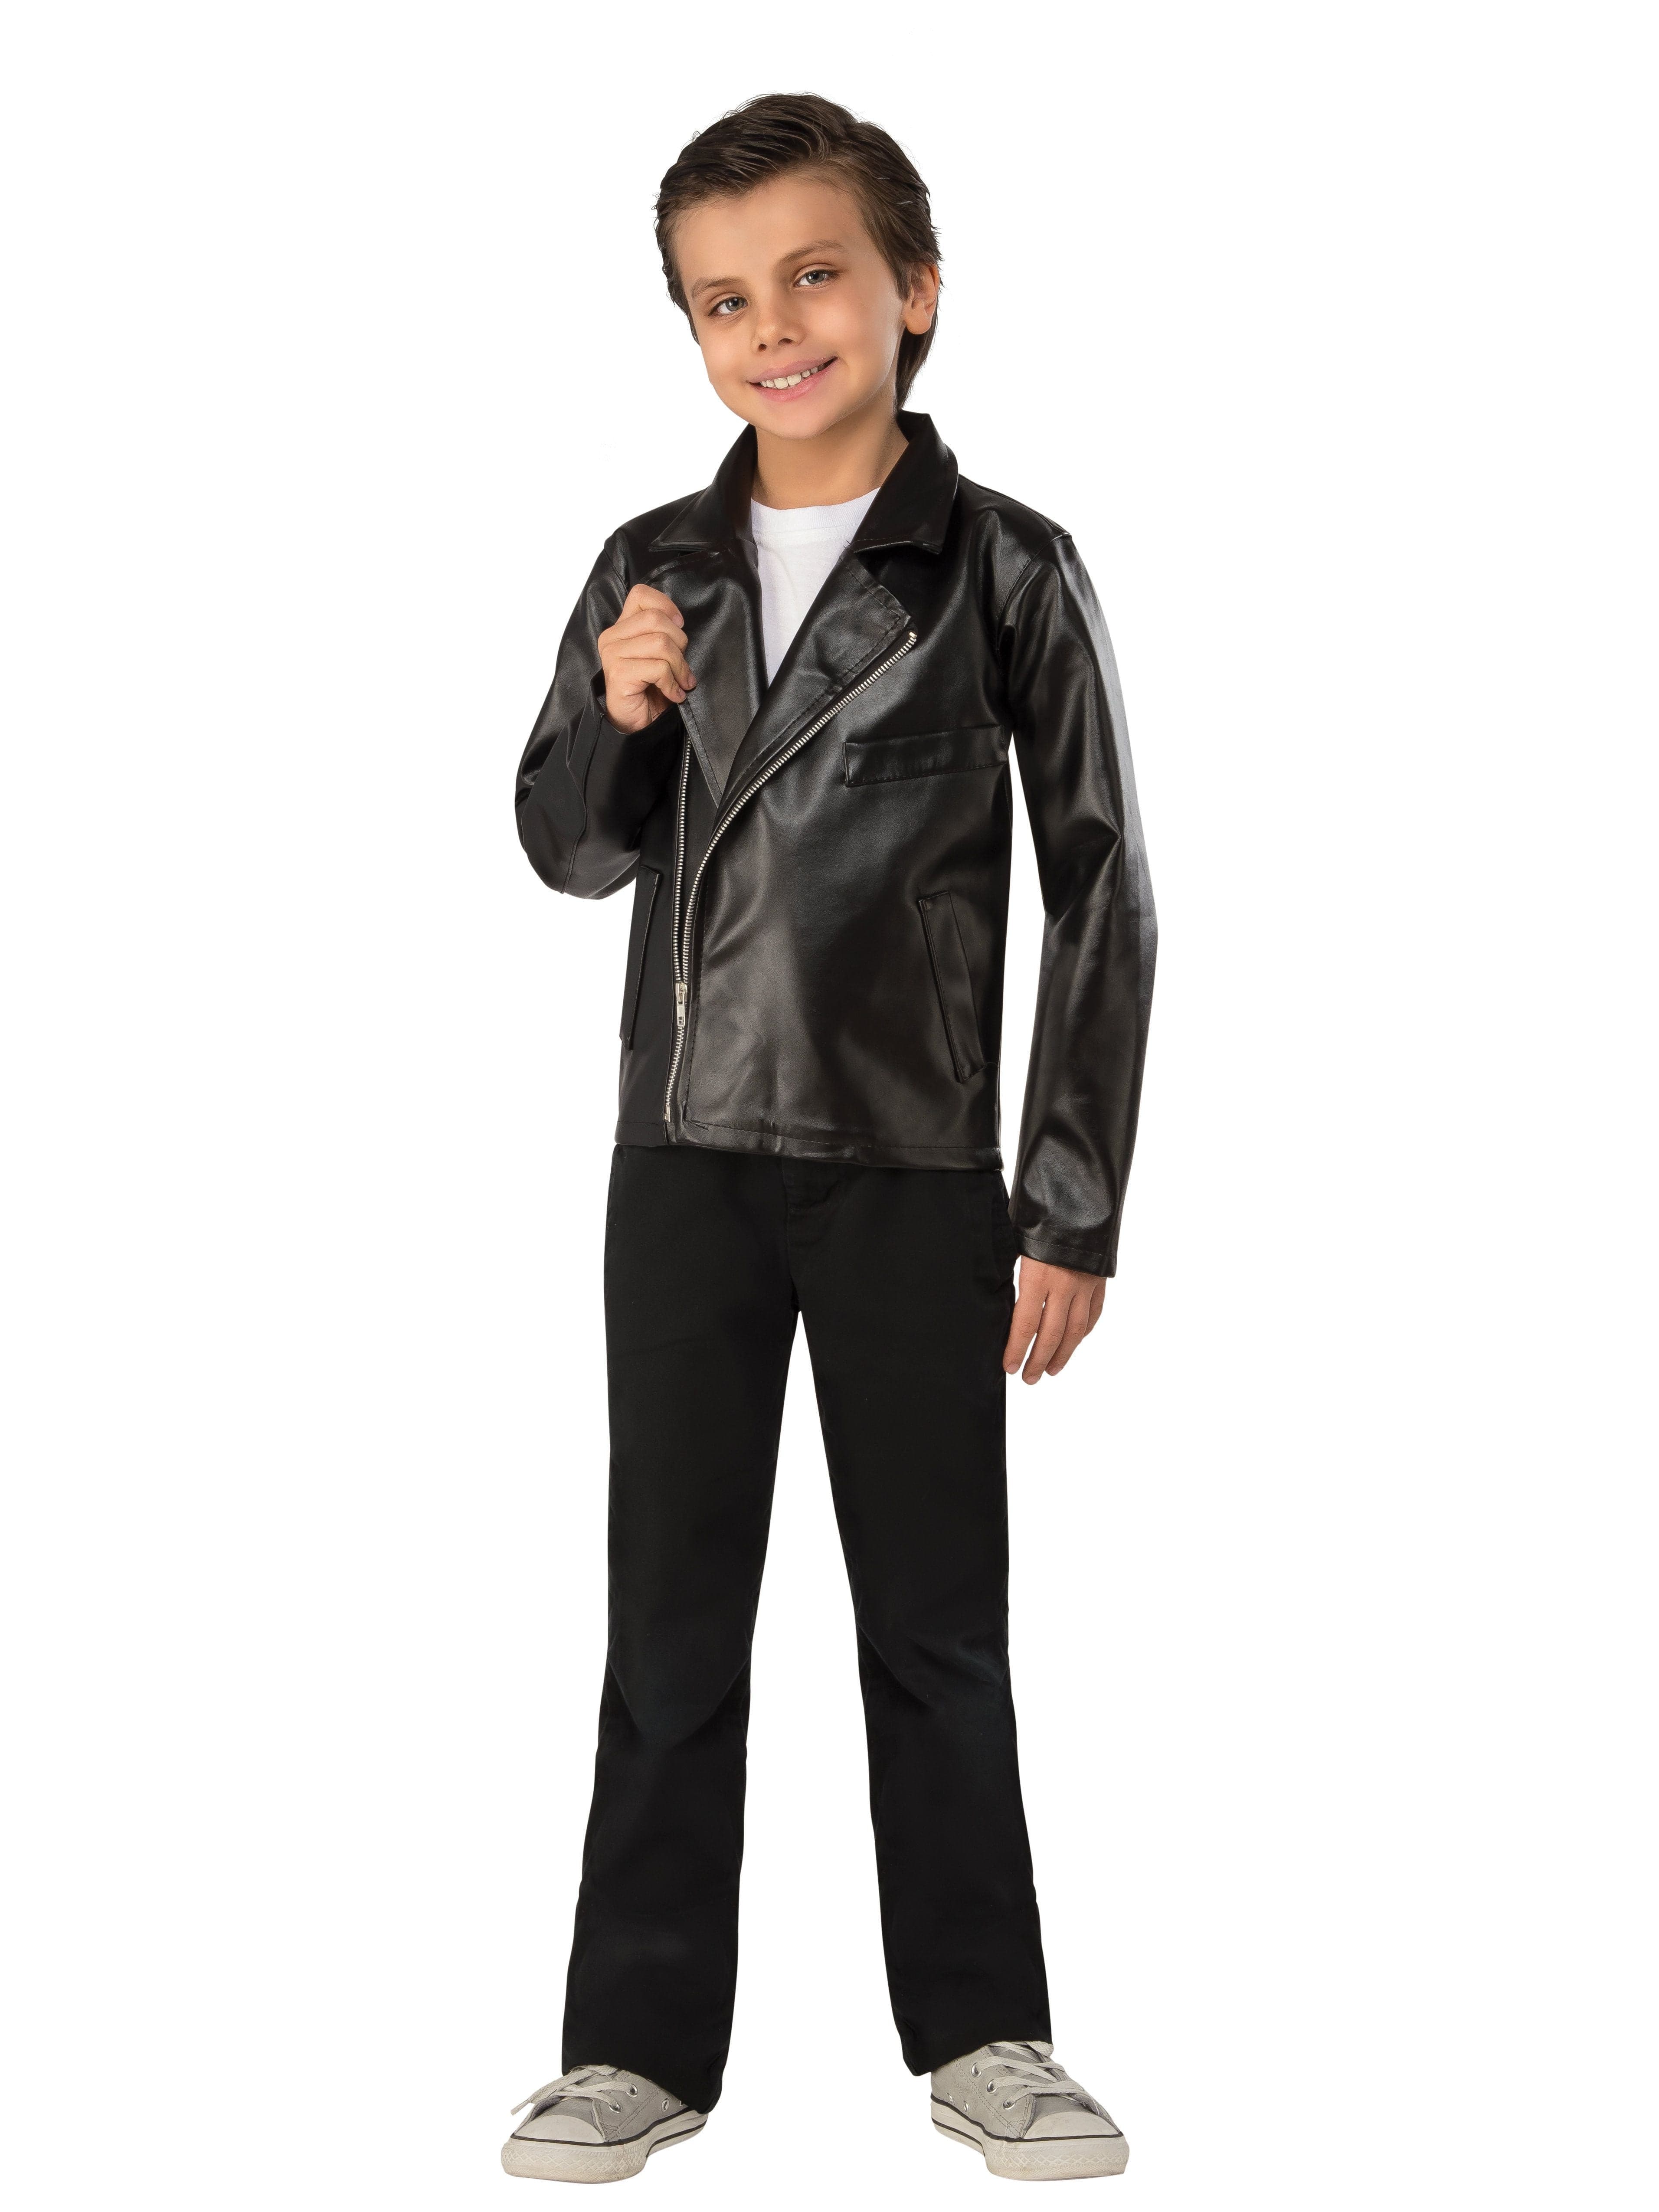 Kids Grease Jacket - costumes.com